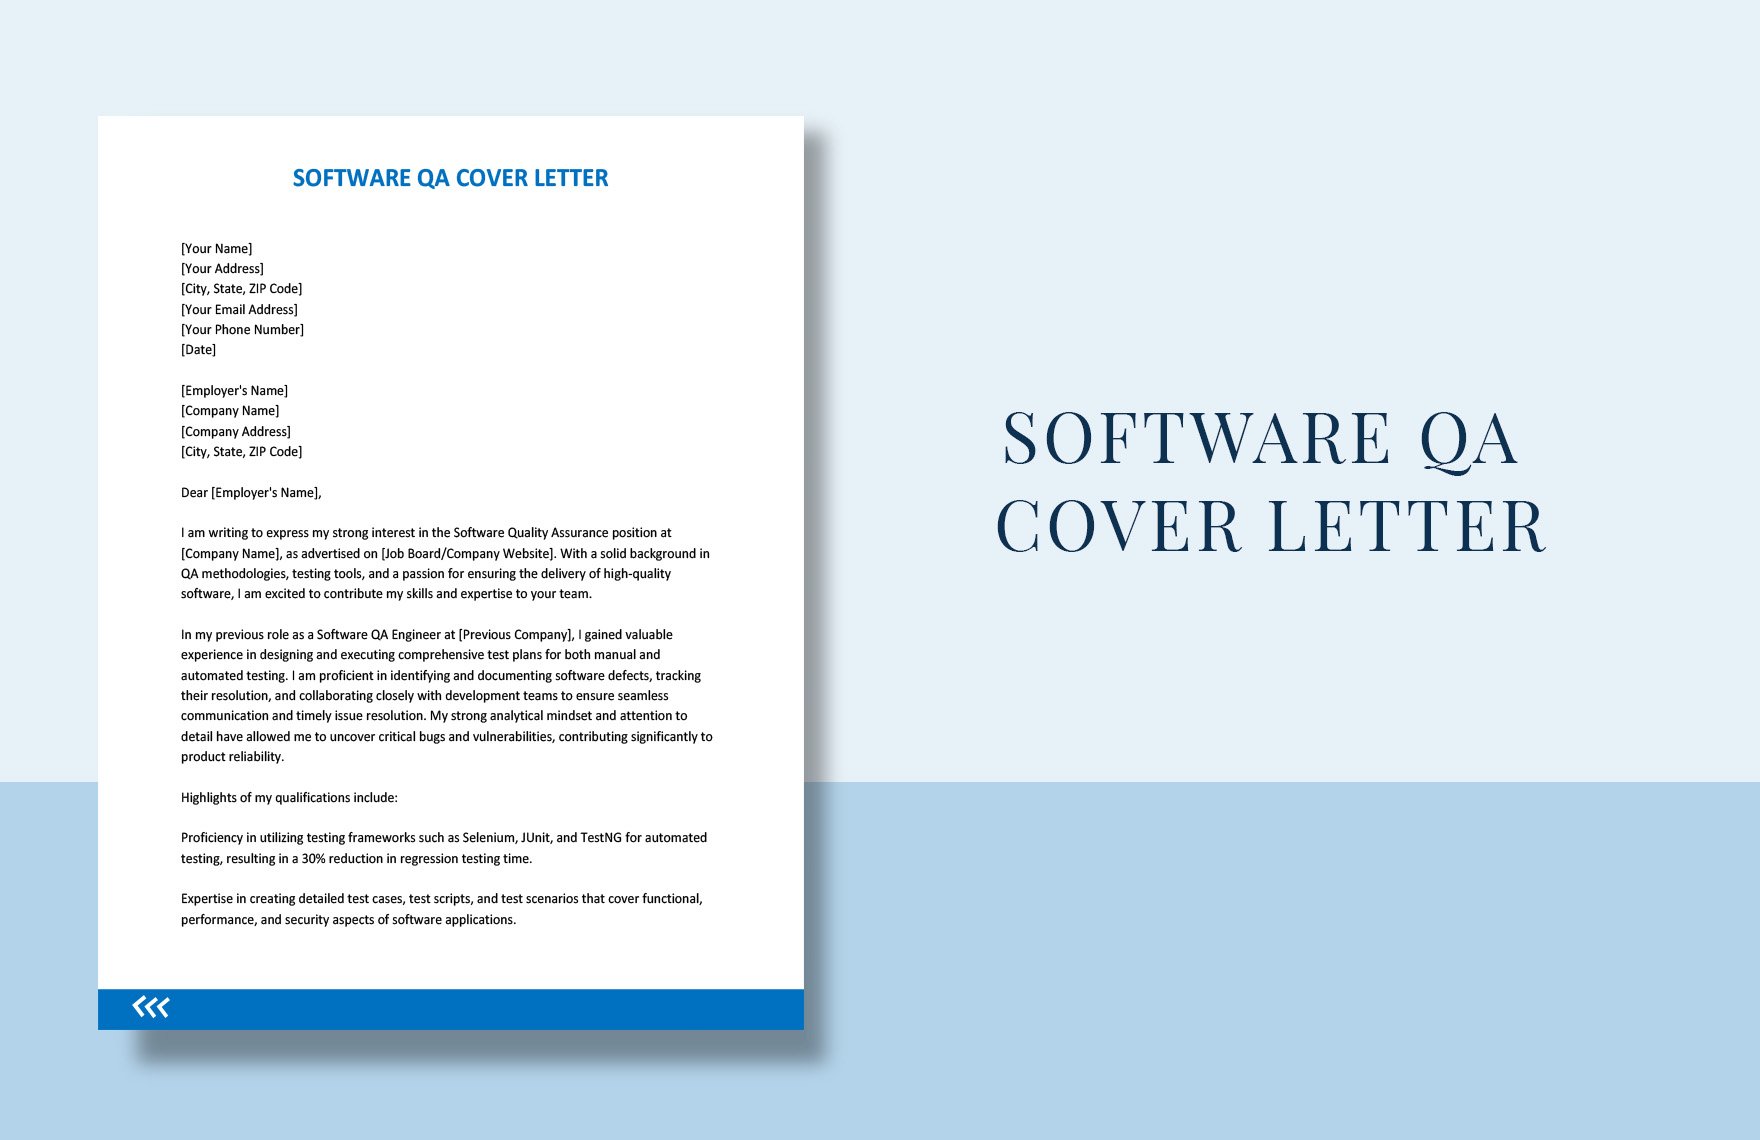 Software QA Cover Letter